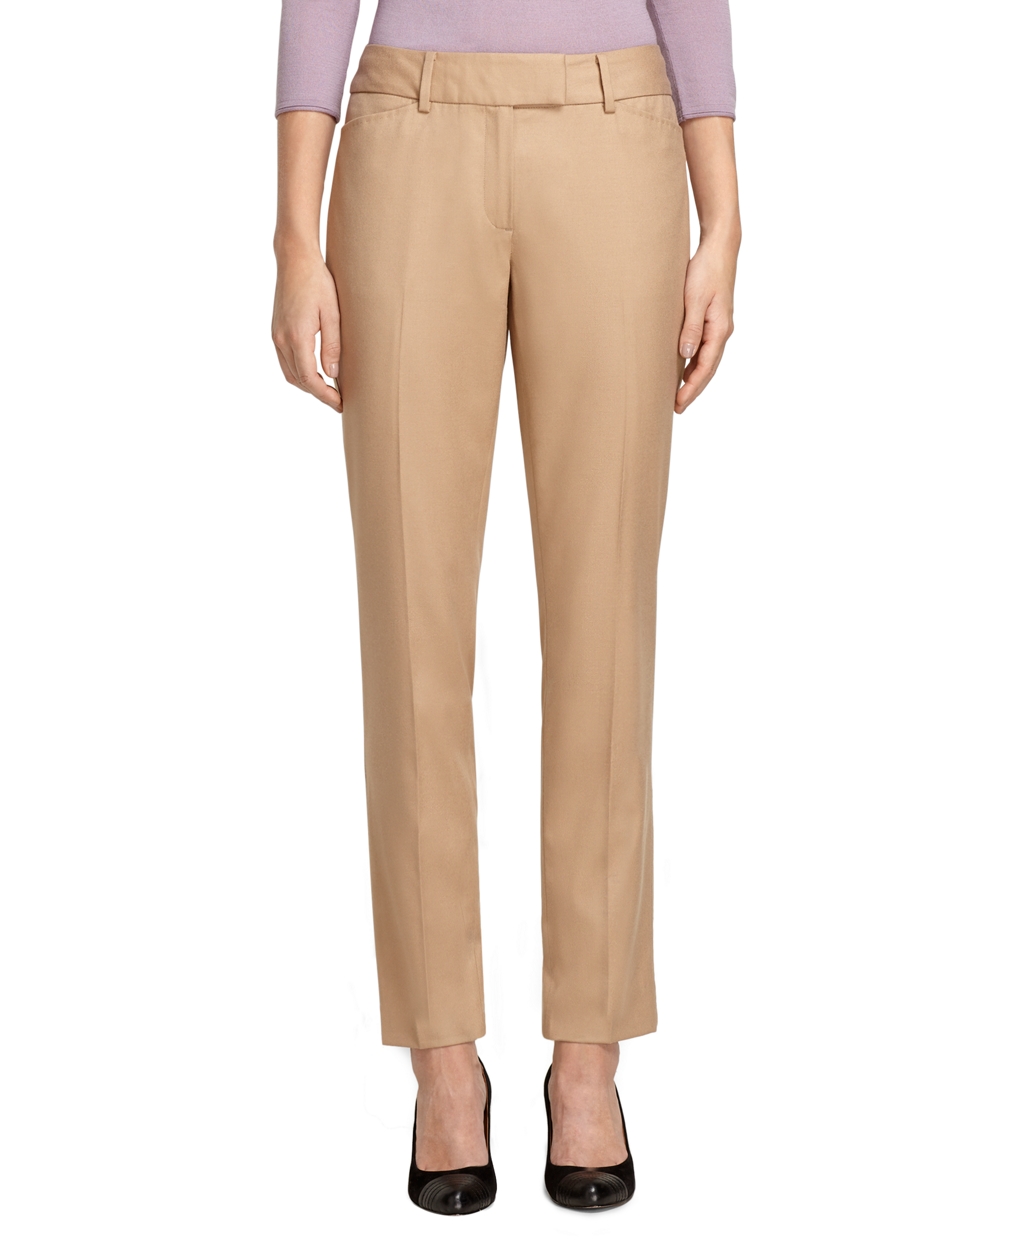 Lyst - Brooks Brothers Caroline Fit Wool Flannel Pants in Natural